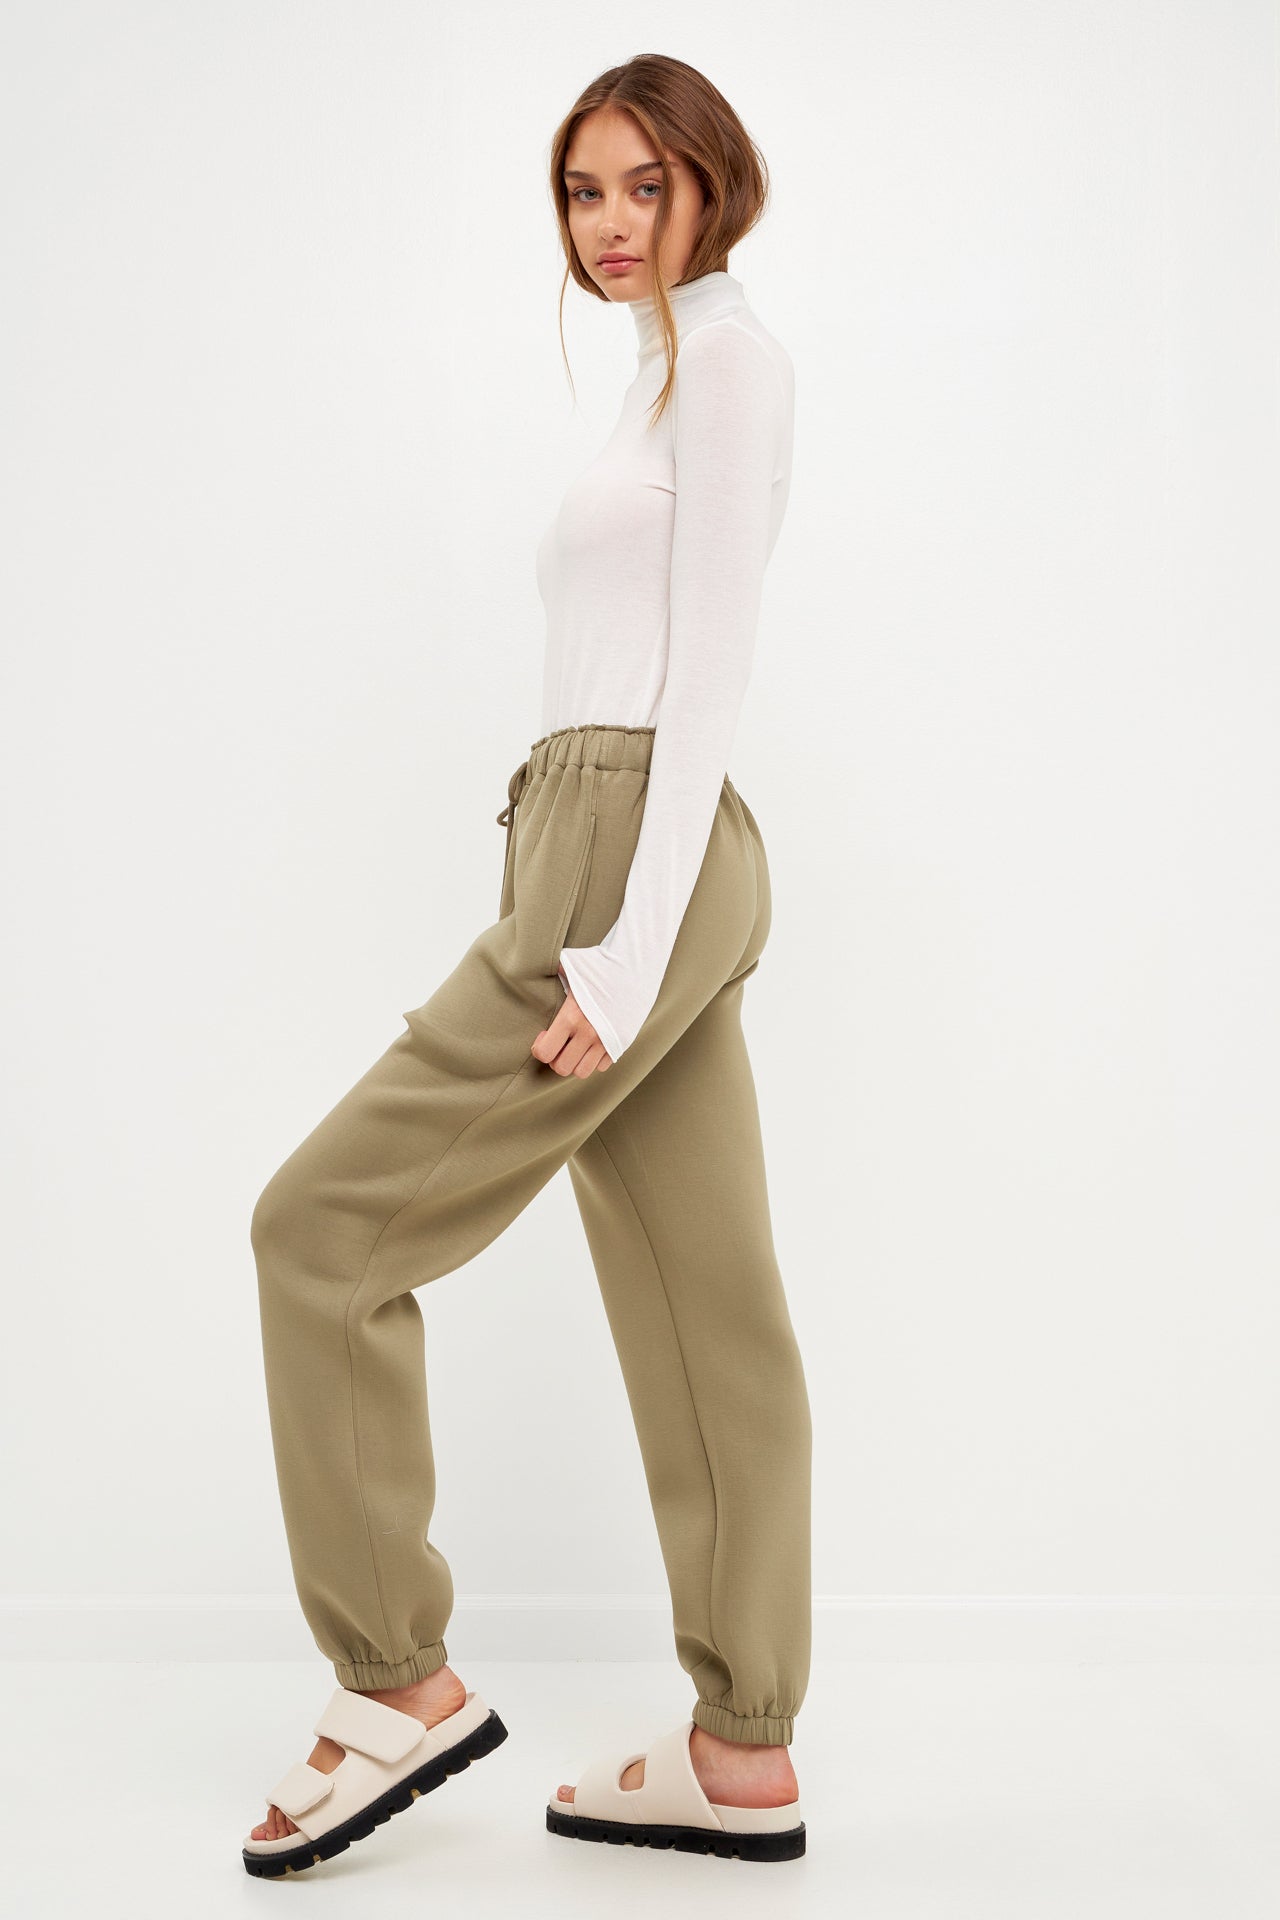 GREY LAB - Loungewear Pants Scuba Joggers - PANTS available at Objectrare